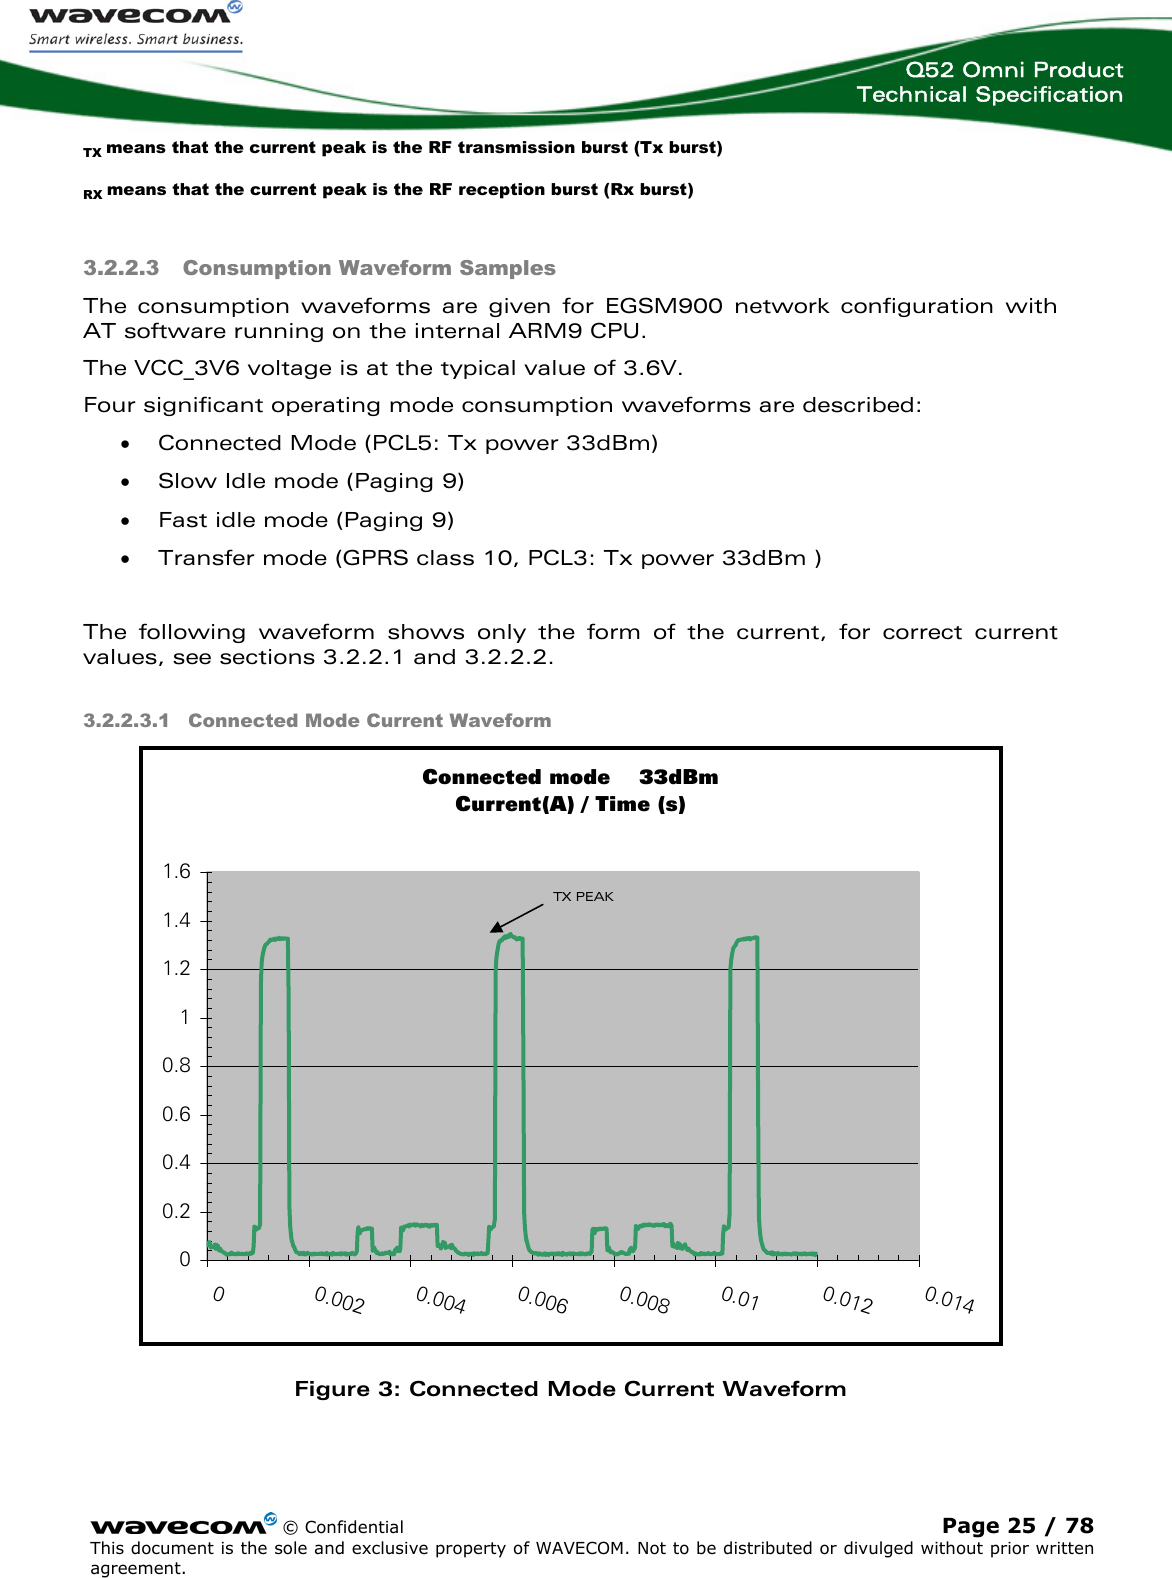  Q52 Omni Product Technical Specification    © Confidential Page 25 / 78 This document is the sole and exclusive property of WAVECOM. Not to be distributed or divulged without prior written agreement.  TX means that the current peak is the RF transmission burst (Tx burst)   RX means that the current peak is the RF reception burst (Rx burst) 3.2.2.3 Consumption Waveform Samples The consumption waveforms are given for EGSM900 network configuration with AT software running on the internal ARM9 CPU. The VCC_3V6 voltage is at the typical value of 3.6V. Four significant operating mode consumption waveforms are described: • Connected Mode (PCL5: Tx power 33dBm) • Slow Idle mode (Paging 9) • Fast idle mode (Paging 9) • Transfer mode (GPRS class 10, PCL3: Tx power 33dBm )  The following waveform shows only the form of the current, for correct current values, see sections 3.2.2.1 and 3.2.2.2. 3.2.2.3.1 Connected Mode Current Waveform Connected mode    33dBmCurrent(A) / Time (s)00.20.40.60.811.21.41.600.0020.0040.0060.0080.010.0120.014  Figure 3: Connected Mode Current Waveform TX PEAK 